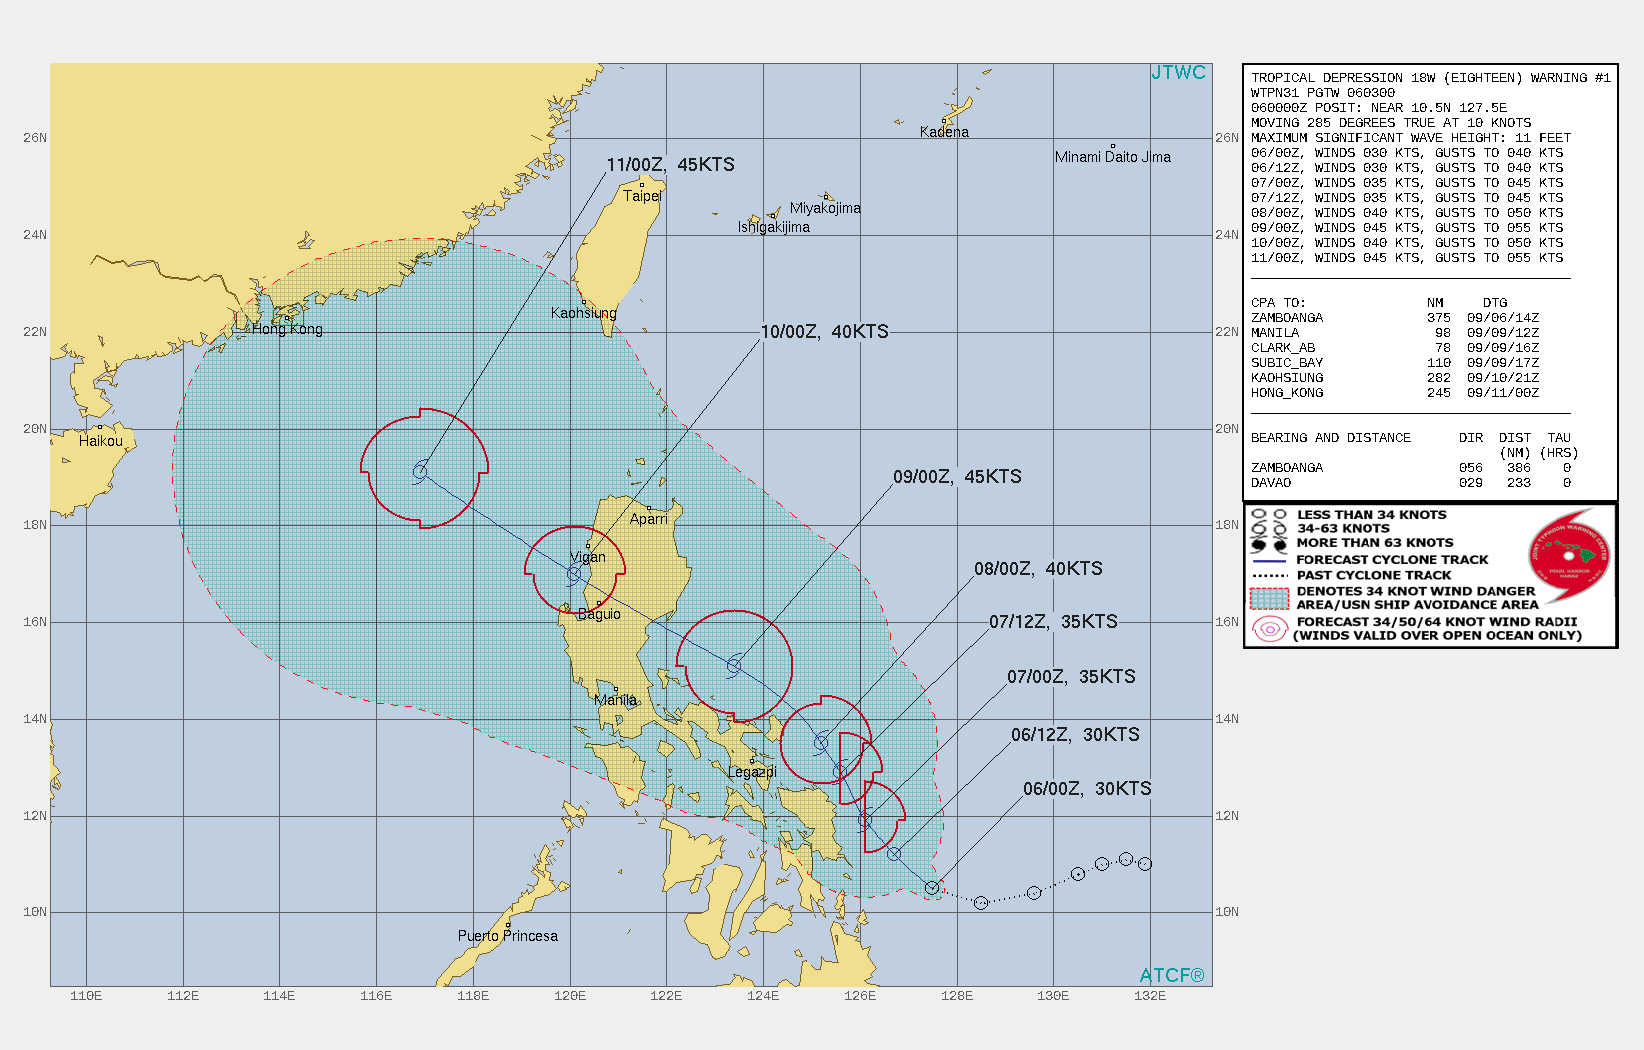 TD 18W. WARNING 1 ISSUED AT 06/03UTC.THIS INITIAL PROGNOSTIC REASONING MESSAGE ESTABLISHES THE FORECAST PHILOSOPHY.  FORECAST DISCUSSION: TD 18W IS EXPECTED TO CONTINUE GENERALLY ON ITS CURRENT TRACK FOR THE ENTIRETY OF THE FORECAST, MAKING LANDFALL NEAR BALER, PHILIPPINES AROUND 84H, CROSS LUZON, THEN EXIT INTO THE SOUTH CHINA SEA (SCS) JUST BEFORE 96H. THE MARGINALLY FAVORABLE ENVIRONMENT, TEMPERED FURTHER BY OUTFLOW FROM ANOTHER CYCLONE WEST OF GUAM THAT IS EXPECTED TO BE DOMINANT, WILL FUEL WEAK INTENSIFICATION TO A PEAK OF 45KNOTS BY 72H; AFTERWARD, LAND INTERACTION, MOSTLY, WILL REDUCE IT TO 40 KNOTS AS IT EXITS INTO THE  SCS. THE WARM WATER MAY AID TO RE-INTENSIFY IT BACK TO 45 KNOTS BY 120H.